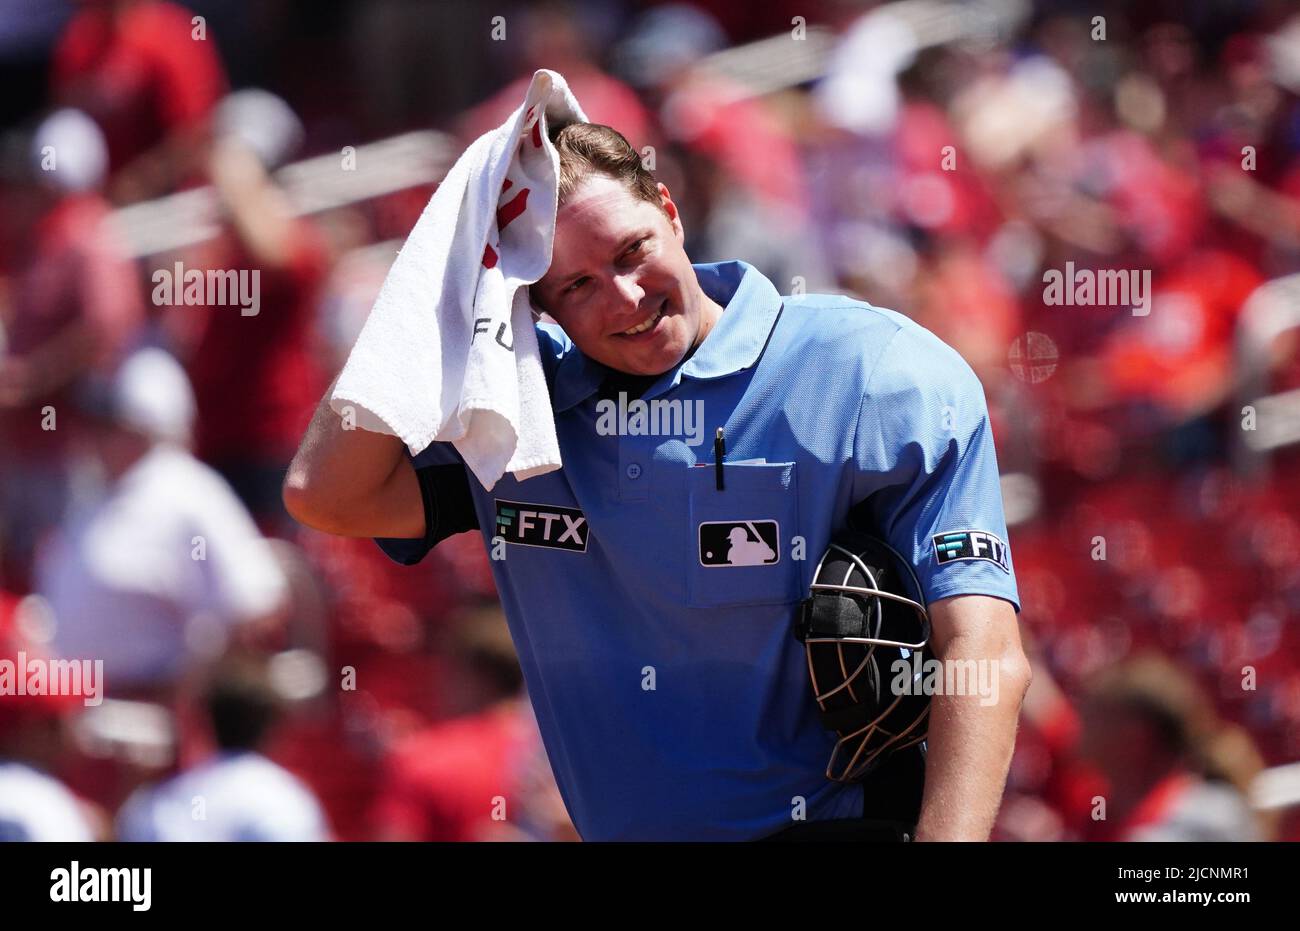 St. Louis, United States. 14th June, 2022. Home plate umpire Clint Vondrak tries to cool down with a towel during the eighth inning of a game between the Pittsburgh Pirates and St. Louis Cardinals at Busch Stadium in St. Louis on Tuesday, June 14, 2022. Temperatures reached 97 degrees with high humidity. Photo by Bill Greenblatt/UPI Credit: UPI/Alamy Live News Stock Photo